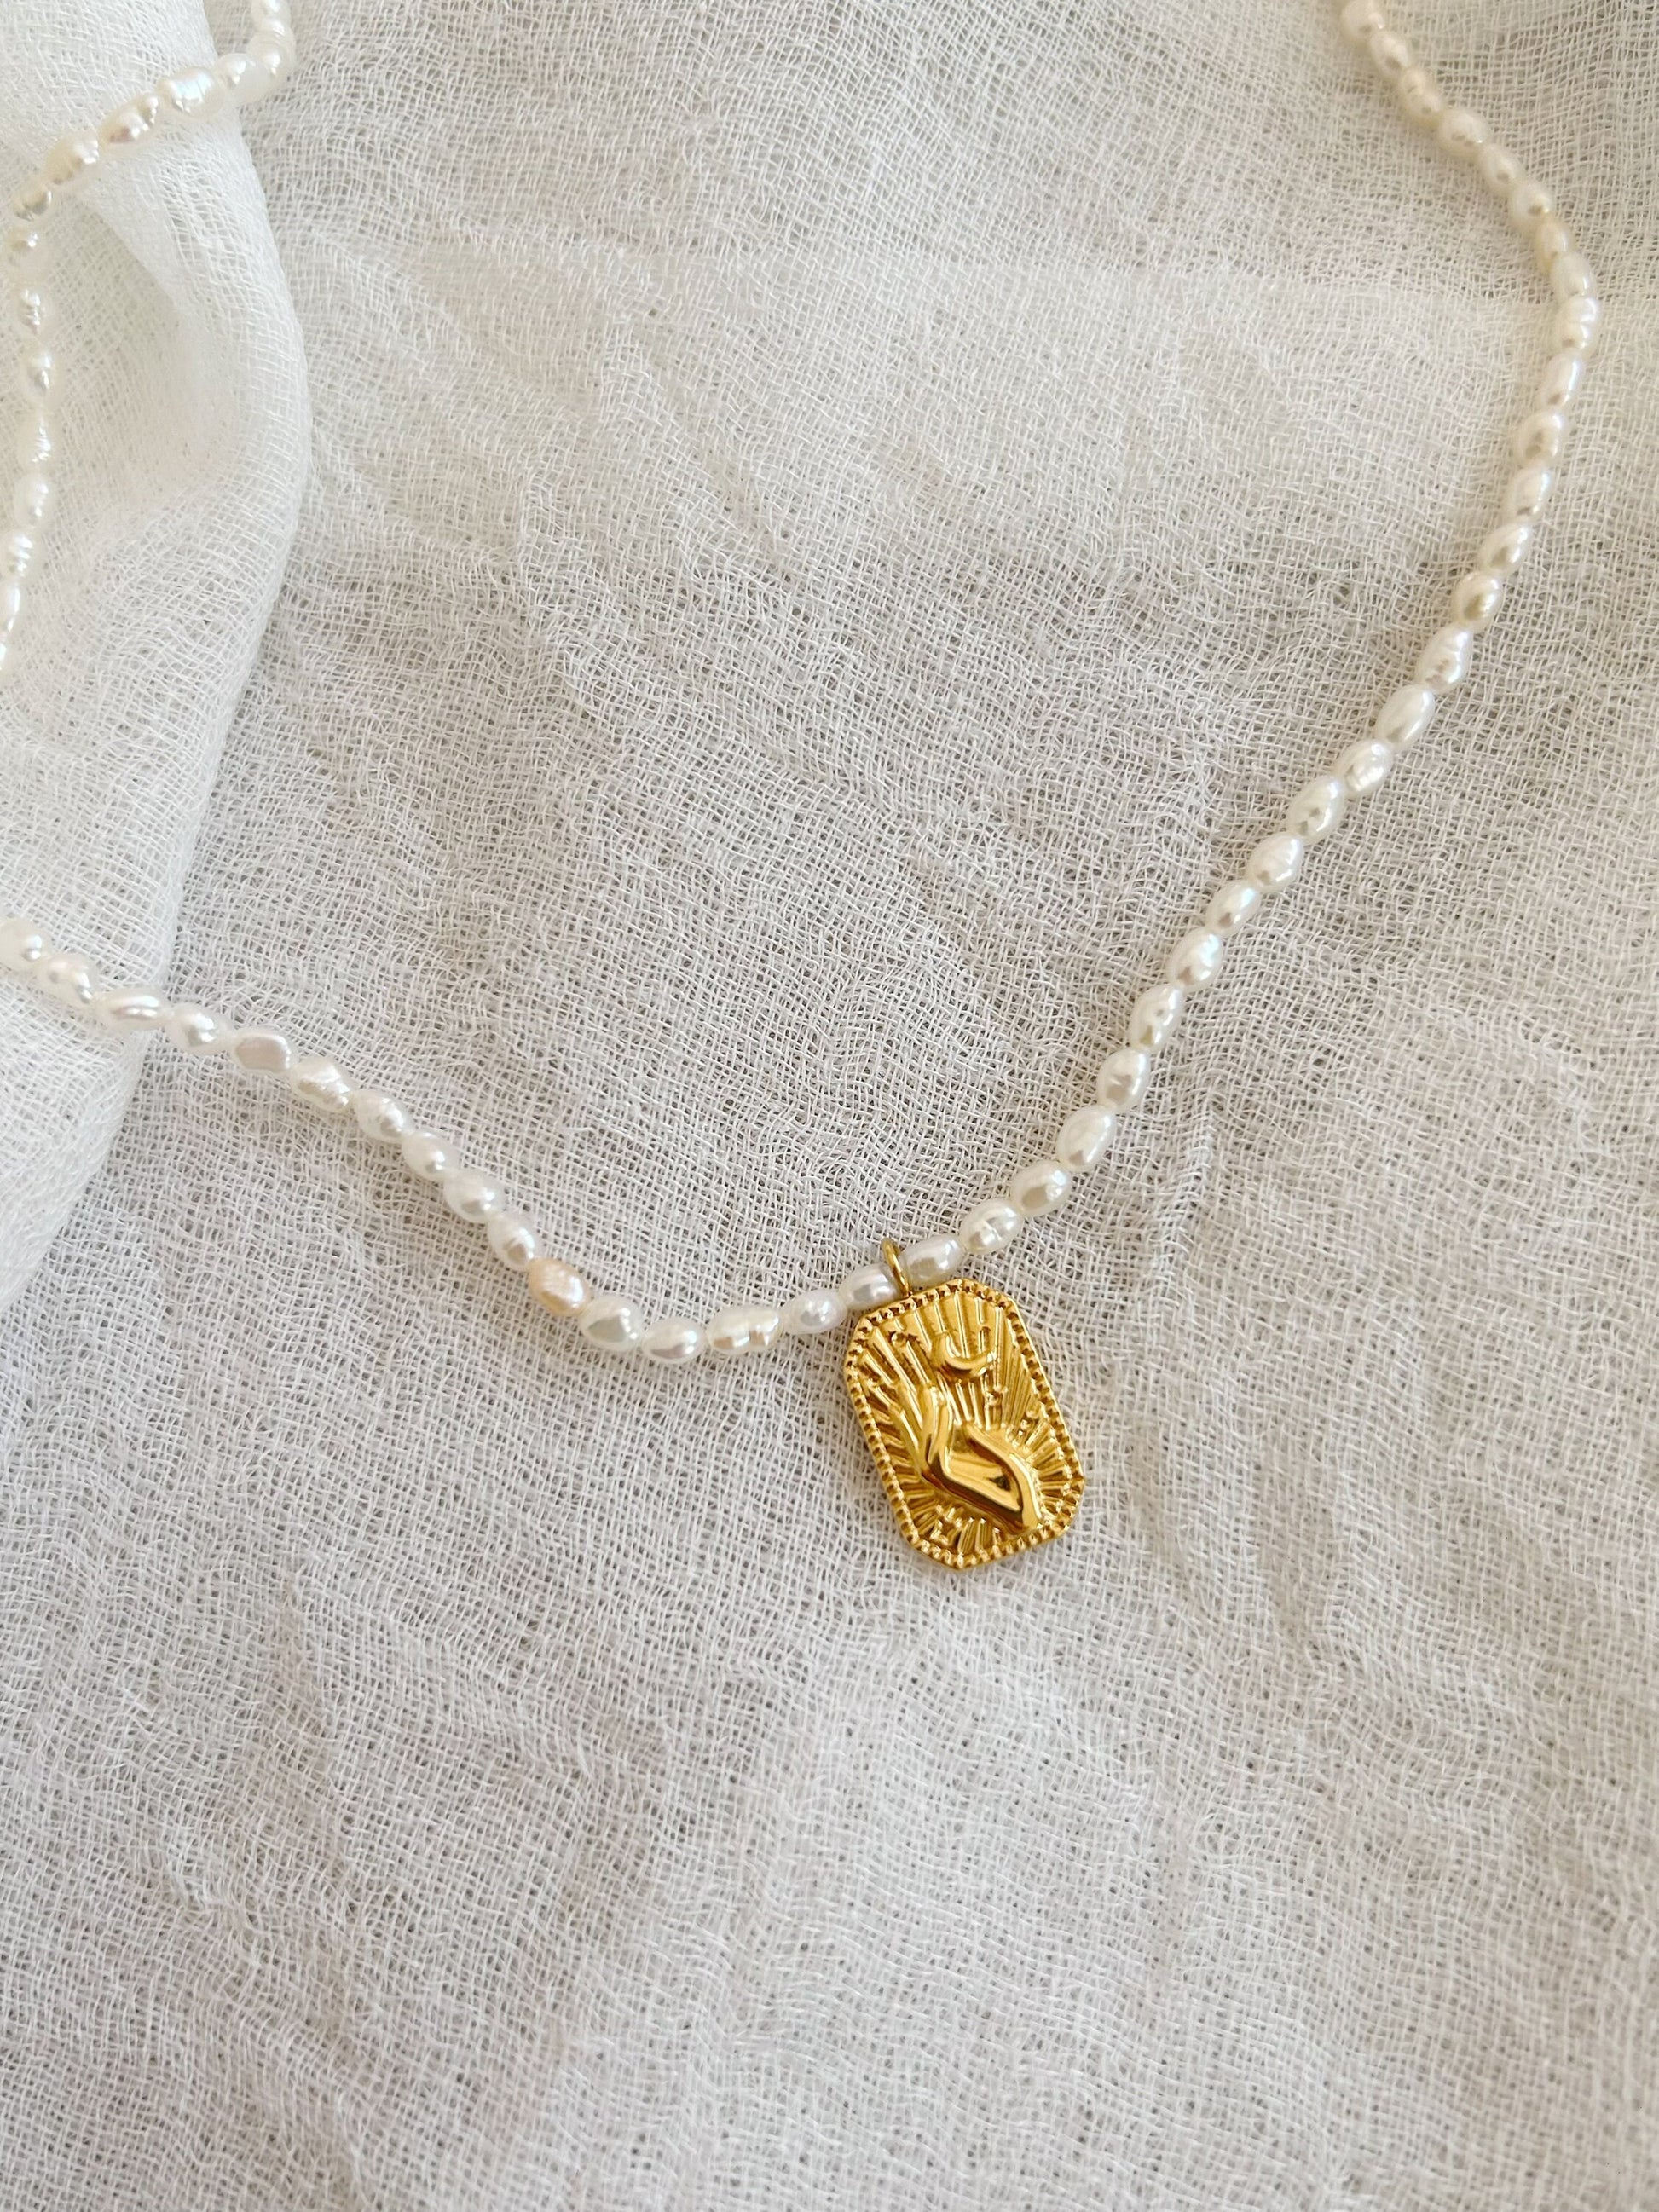 Hand and moon pendant, Chic 14k gold plated pendant, freshwater pearl necklace, statement necklace, gifts for her